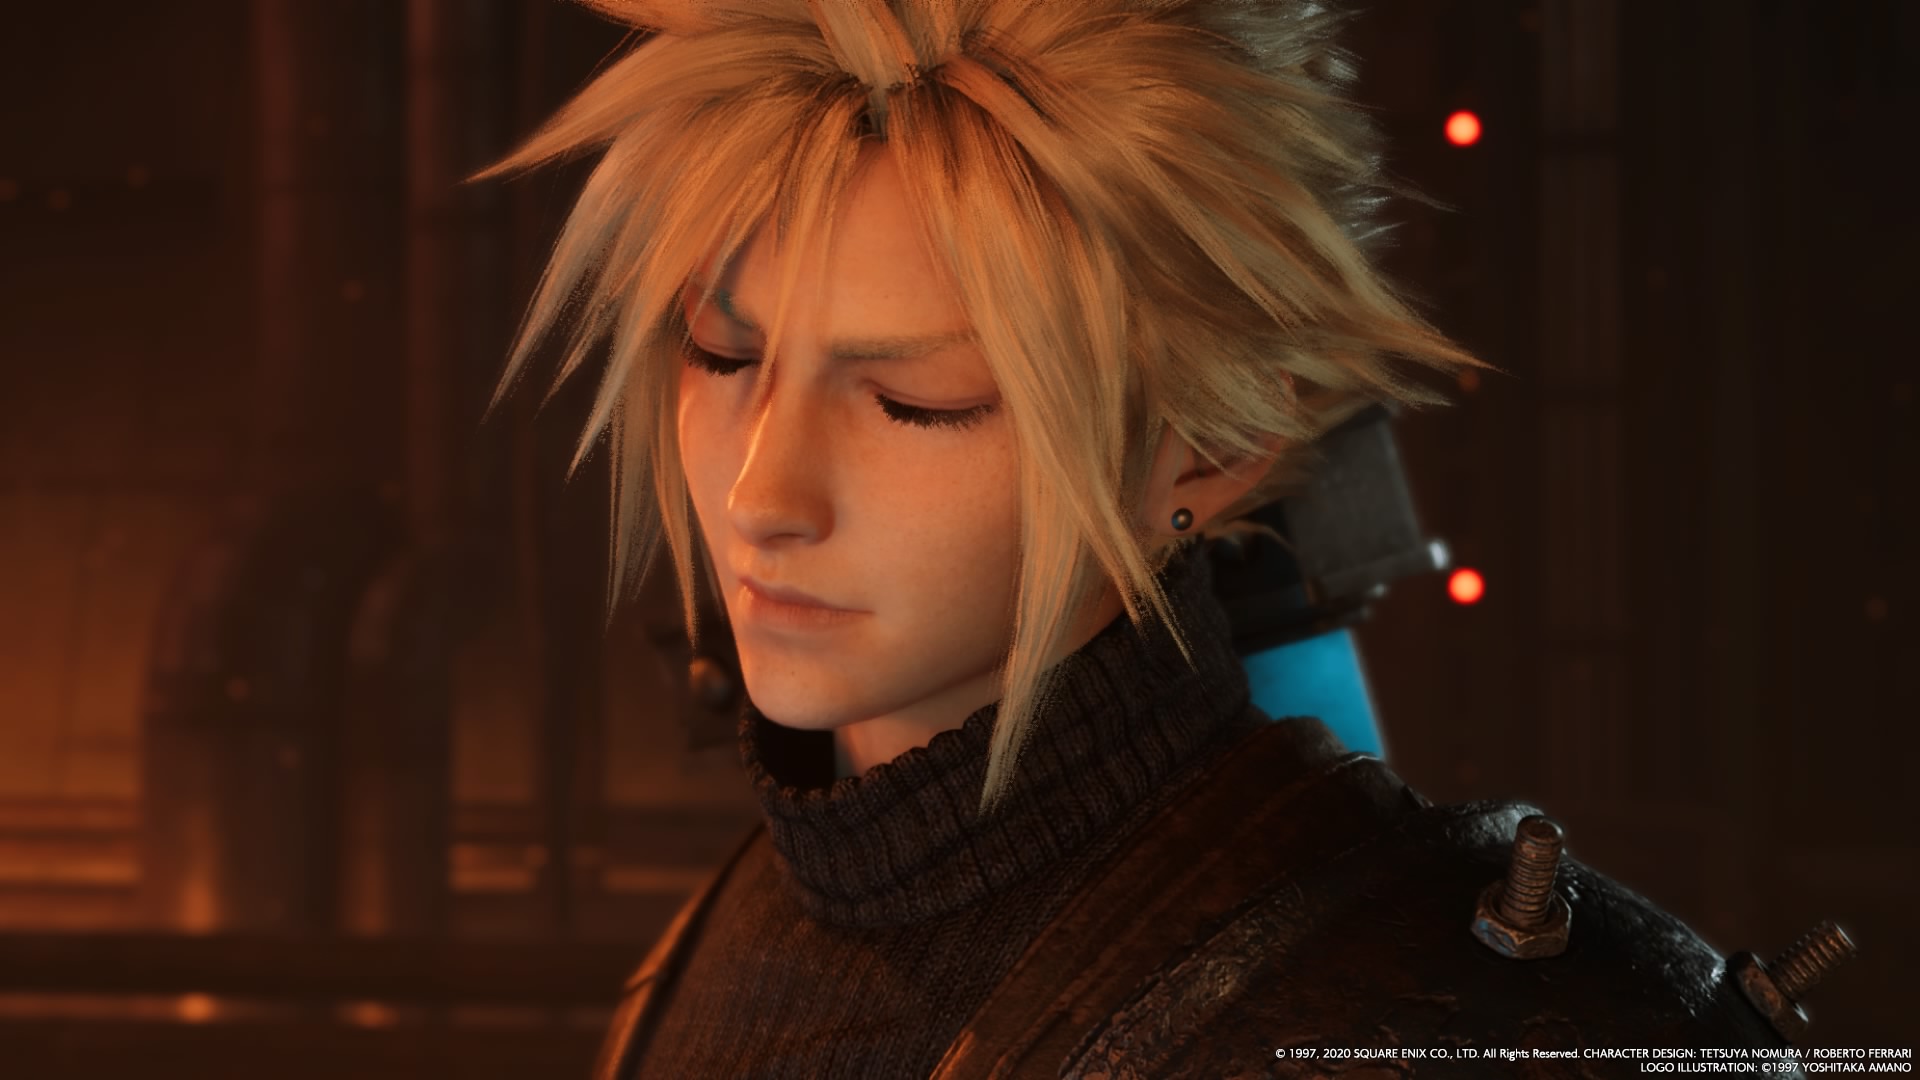 Final Fantasy VII Remake spoiler-free review: Our kind of Cloud gaming